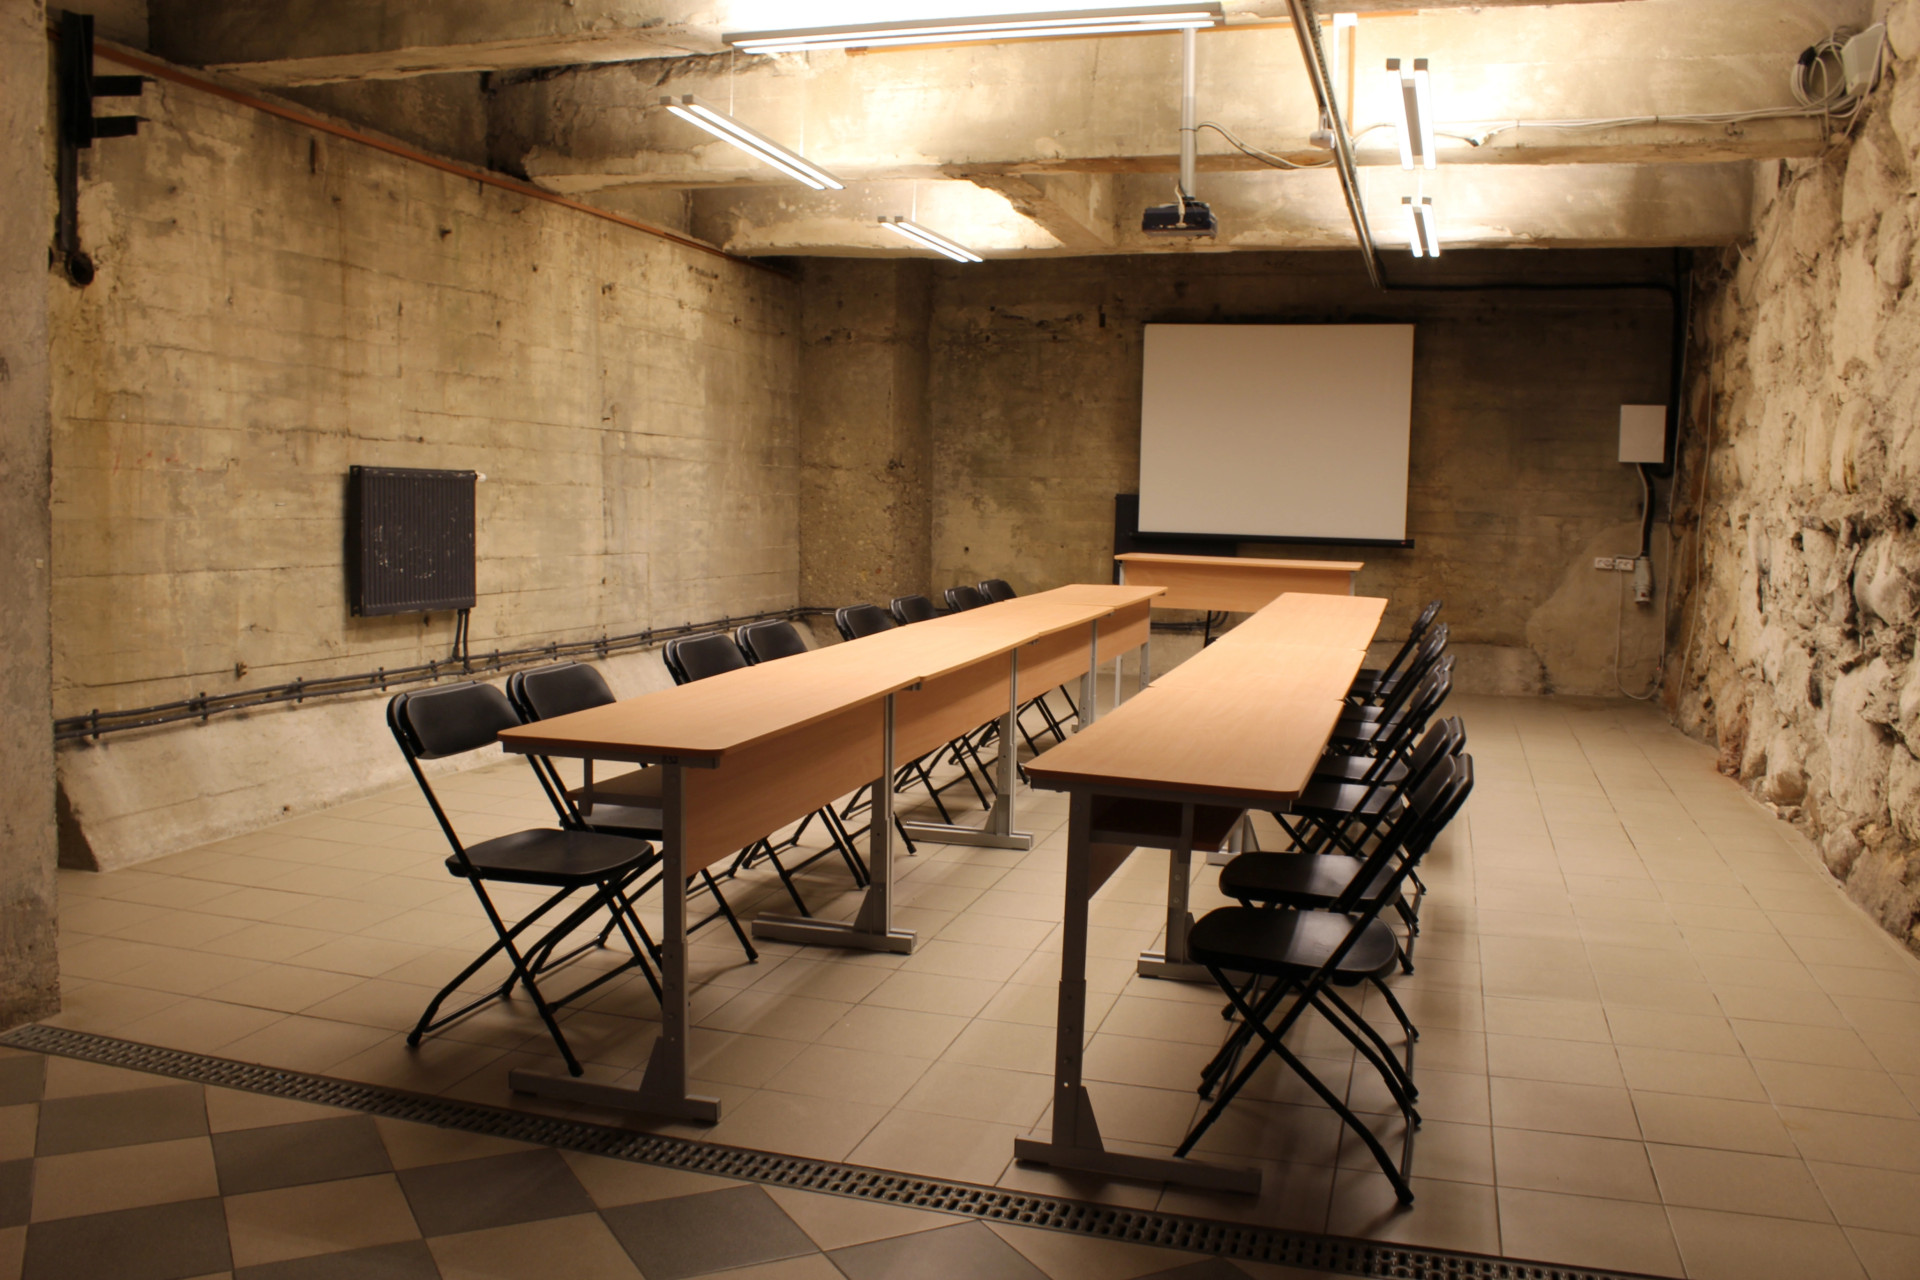 Conference rooms | Vilnius | Energy and Technology museum | picture